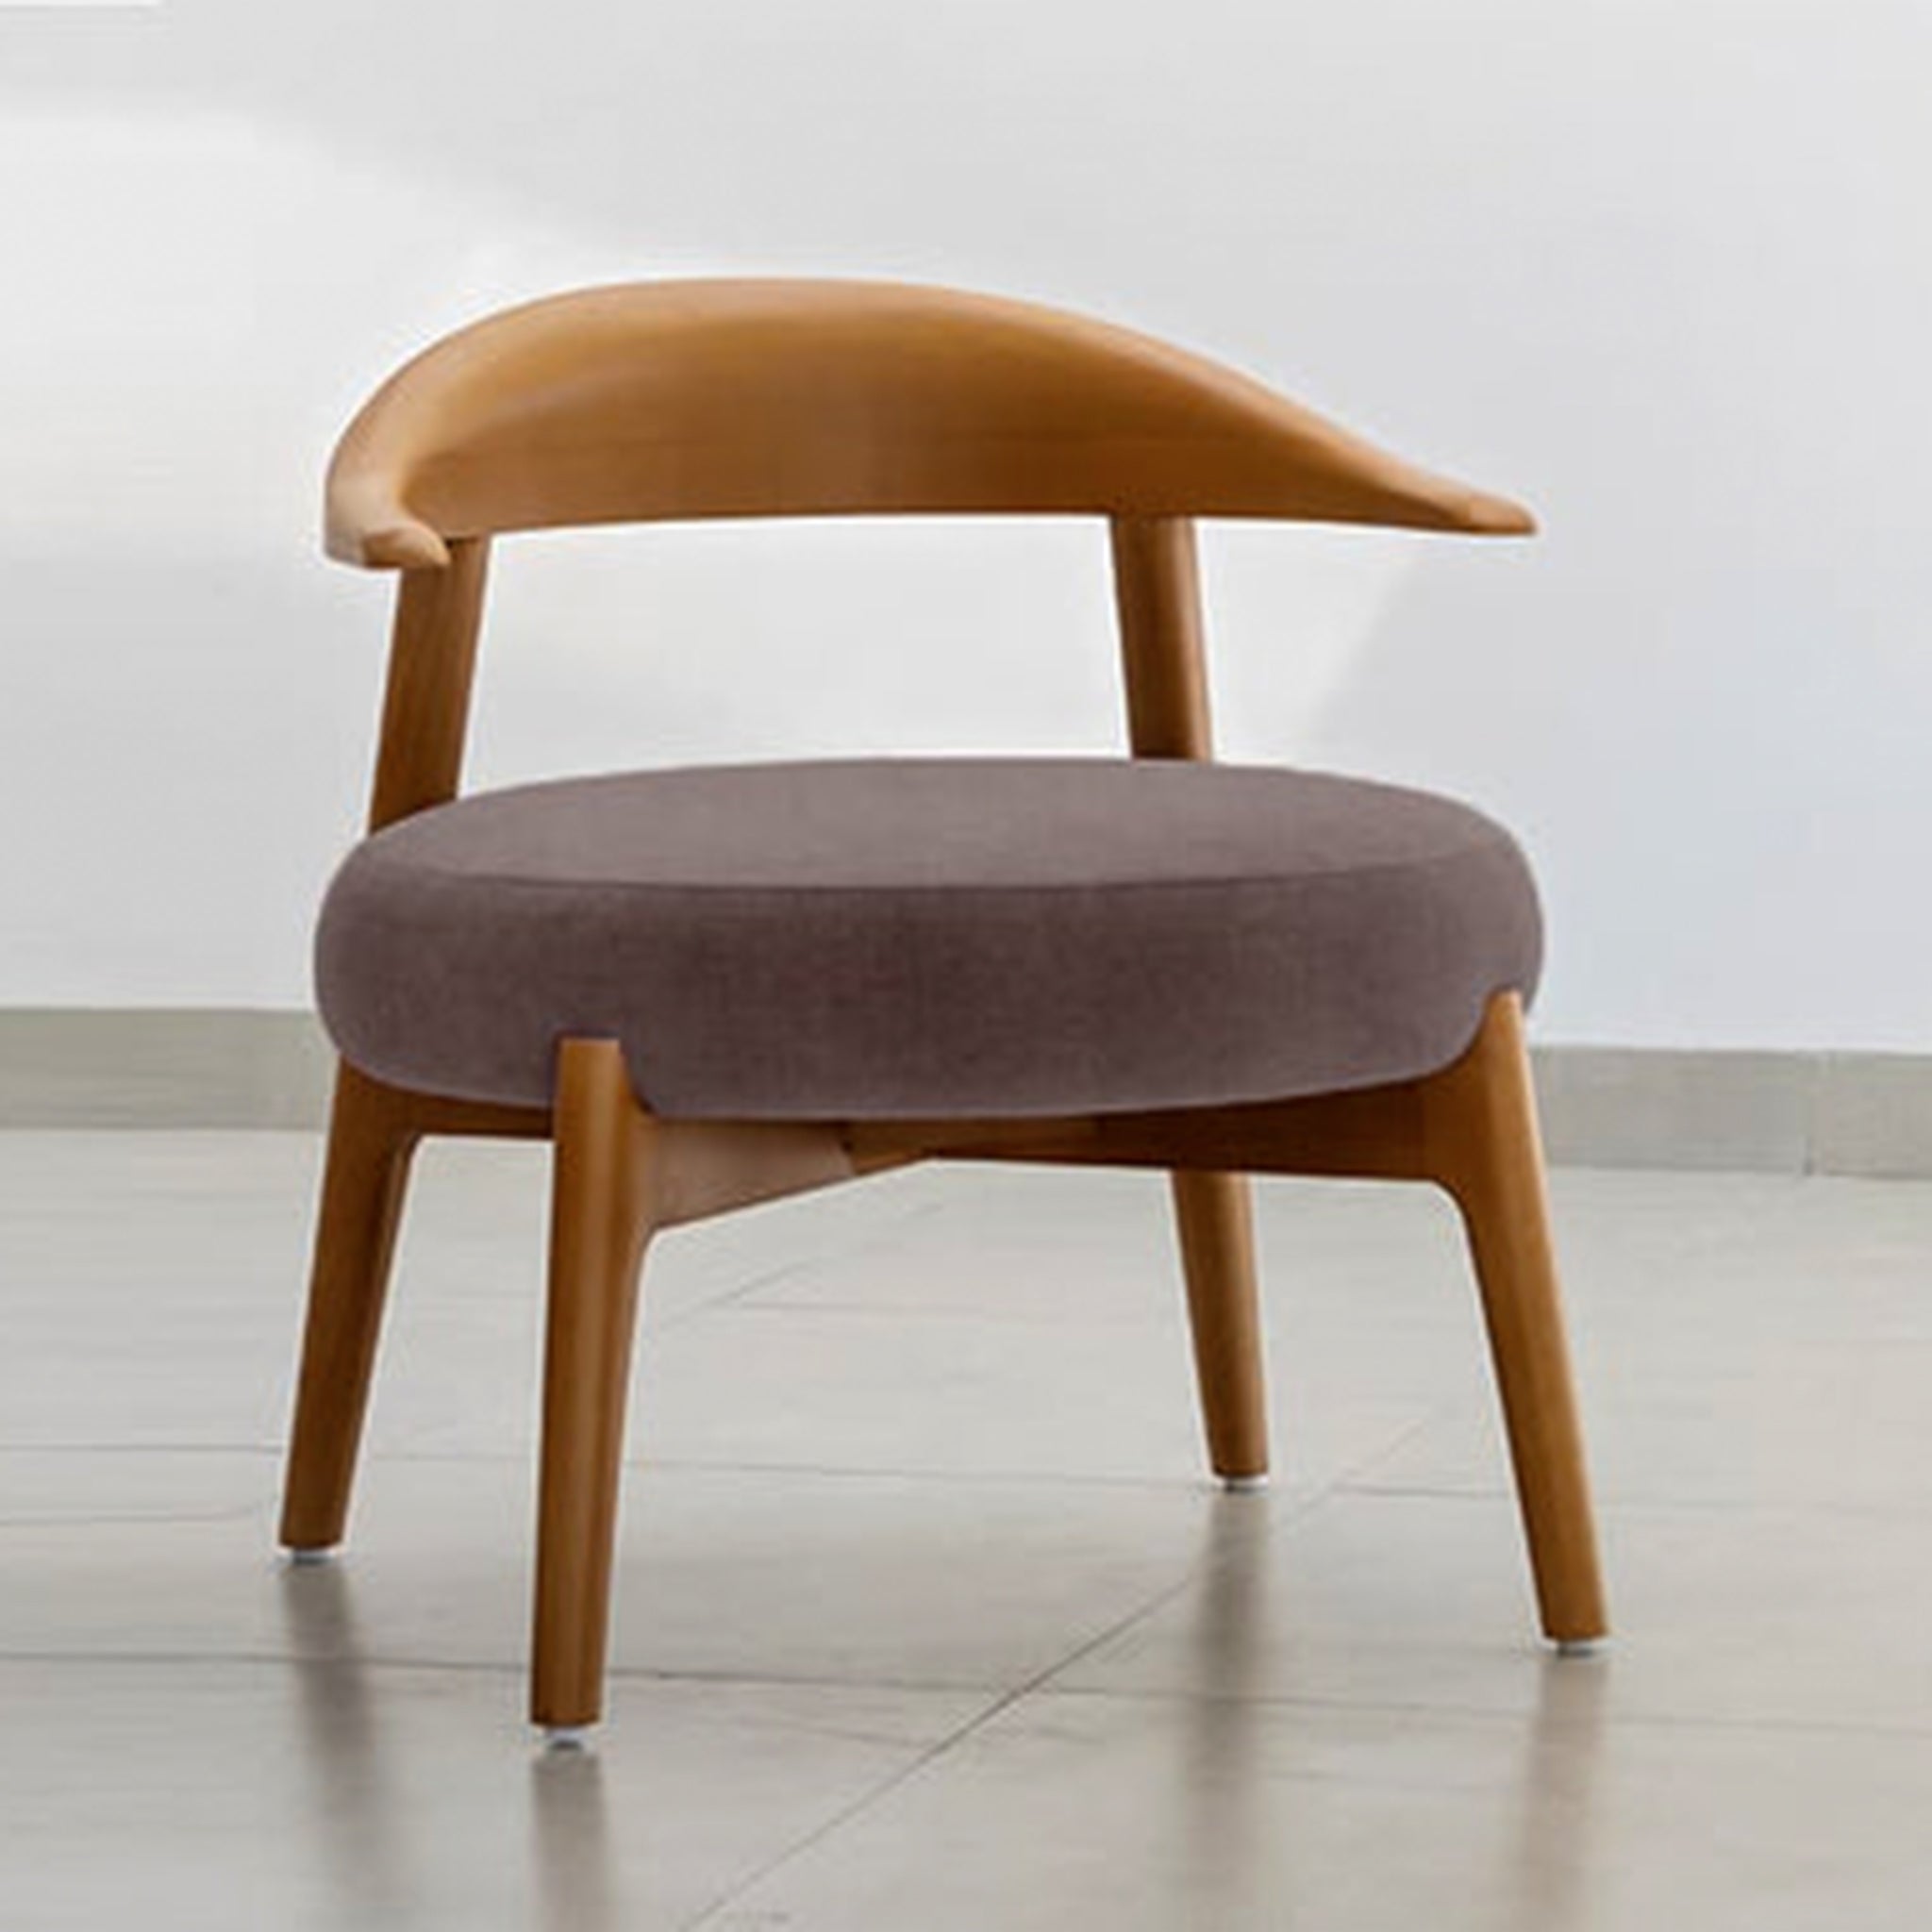 "The Hyde Accent Chair with sleek wooden backrest and cushioned seat"